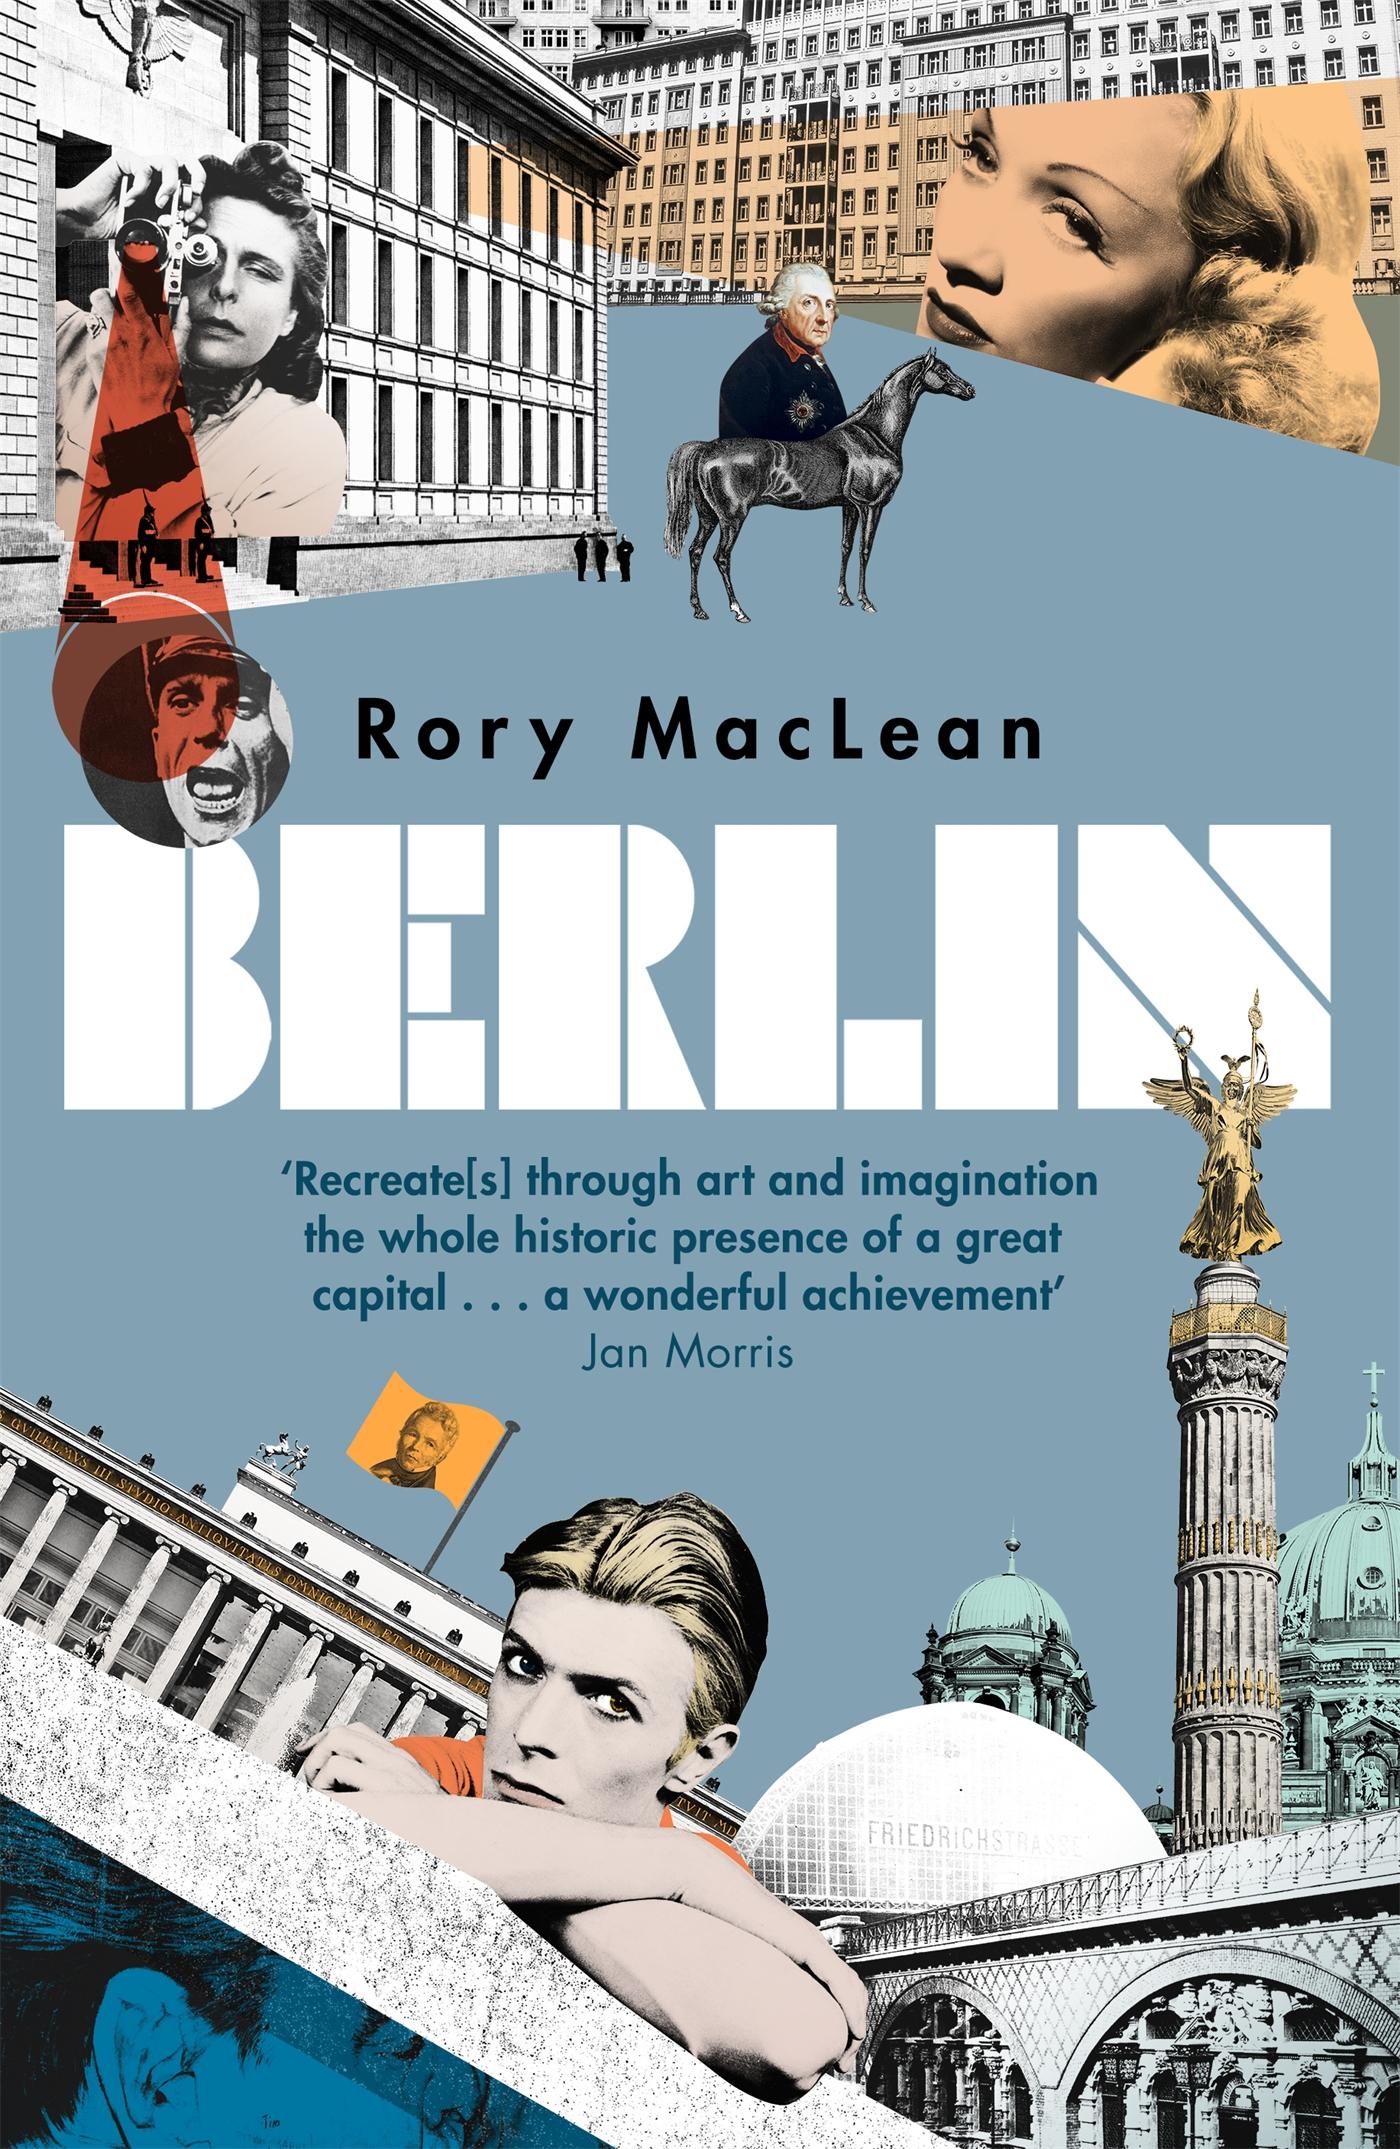 Berlin / Imagine a City / Rory MacLean / Taschenbuch / VIII / Englisch / 2015 / Orion Publishing Group / EAN 9781780224589 - MacLean, Rory